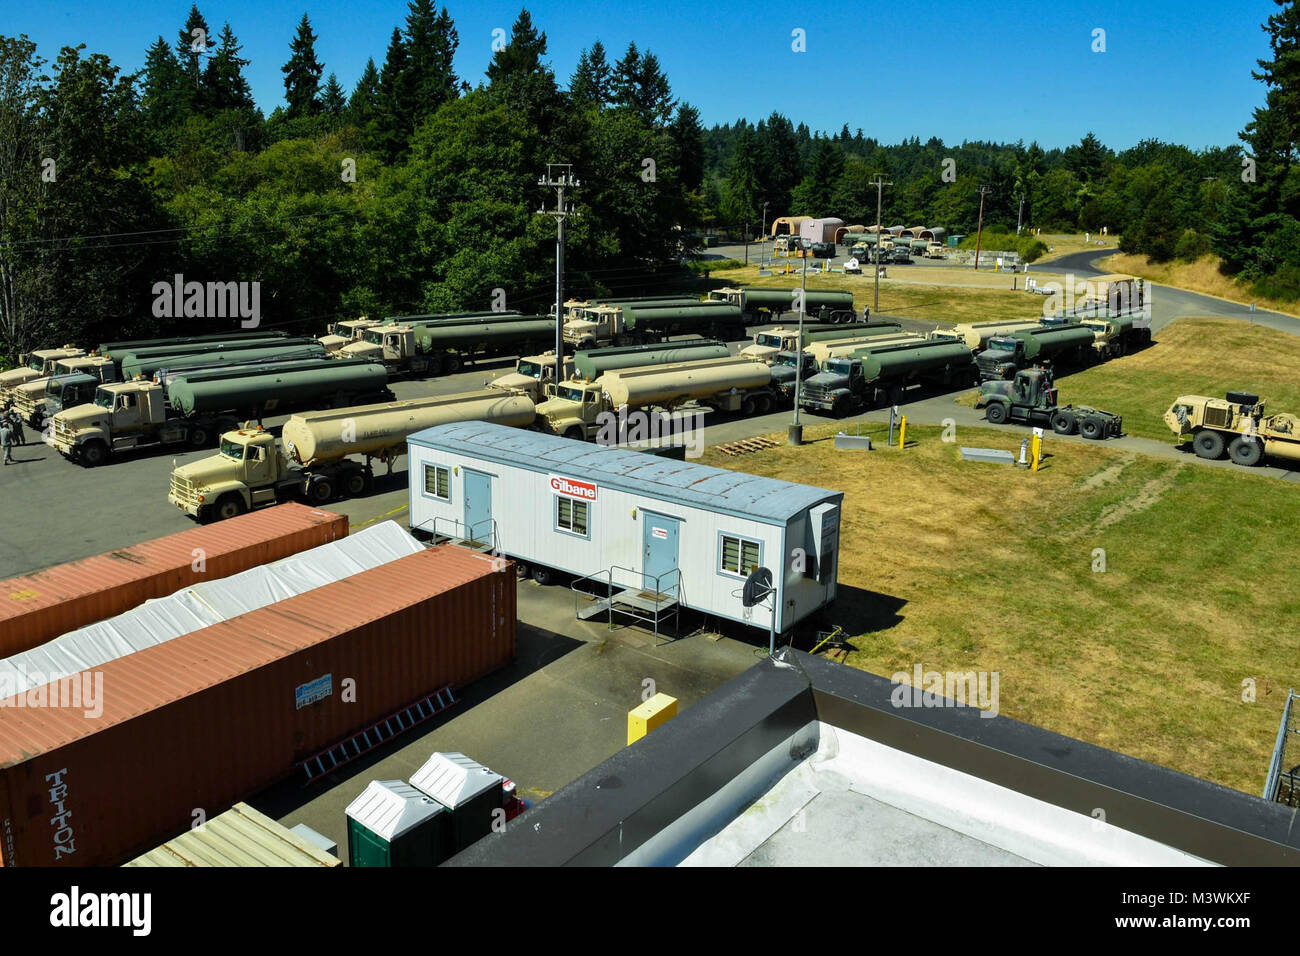 170718-N-SH284-228 MANCHESTER, Wash. (July 18, 2017) United States Army 475th Quartermaster Group fuel trucks are staged in an empty lot at Naval Supply Systems Command Fleet Logistics Center (NAVSUP FLC) Puget Sound’s Manchester Fuel Depot during the 2017 Quartermaster Liquid Logistics Exercise (QLLEX). QLLEX is an annual exercise for Army Reserve units to train for their wartime mission of providing petroleum and water to units throughout the continental United States. This year’s exercise had convoys of Army trucks based out of Joint Base Lewis-McCord (JBLM) transporting fuel provided by NA Stock Photo